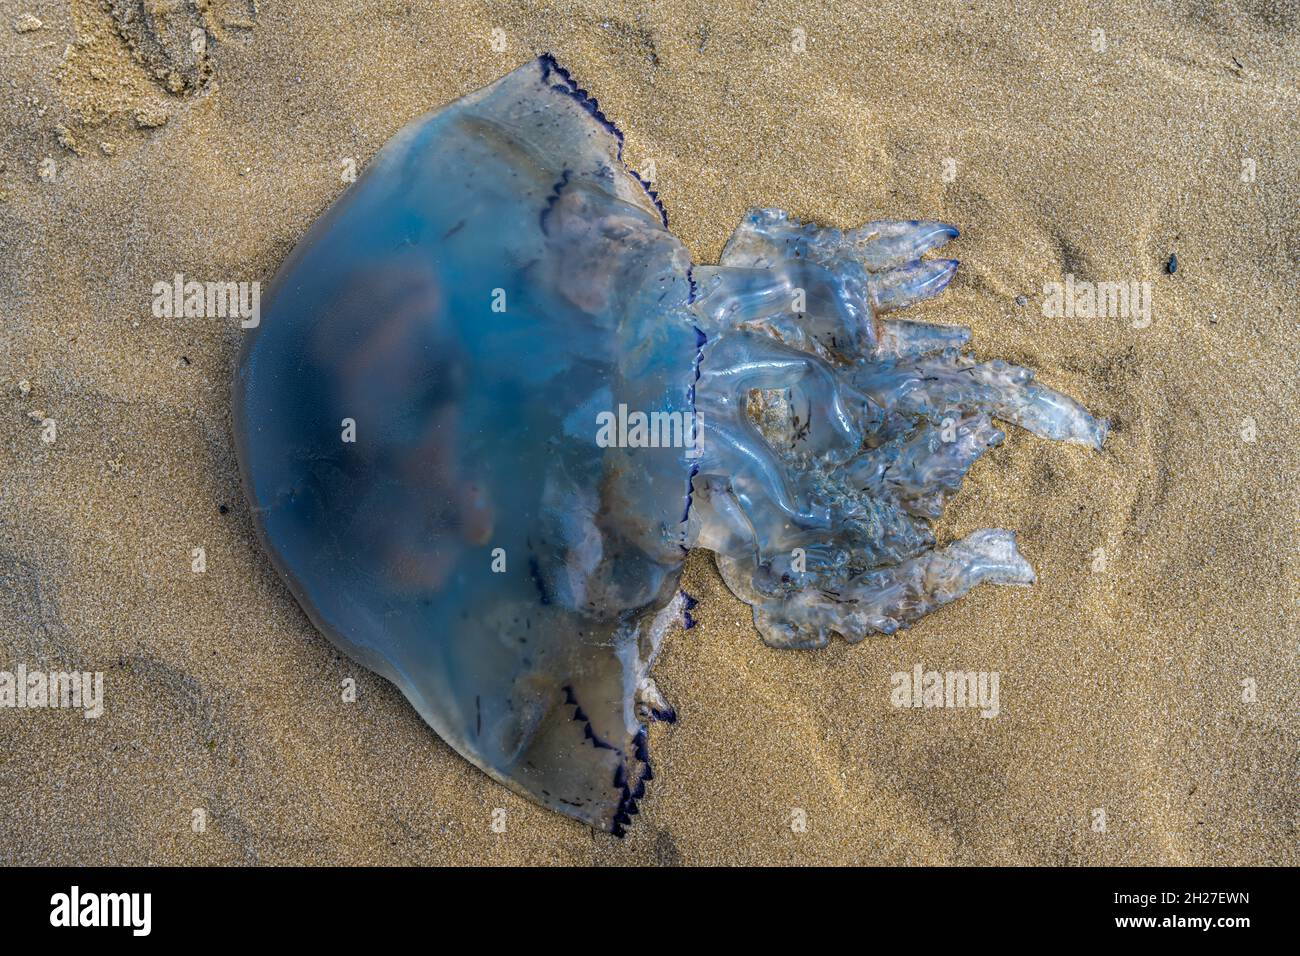 Stranded Jellyfish at the Beach on Sylt, Germany Stock Photo